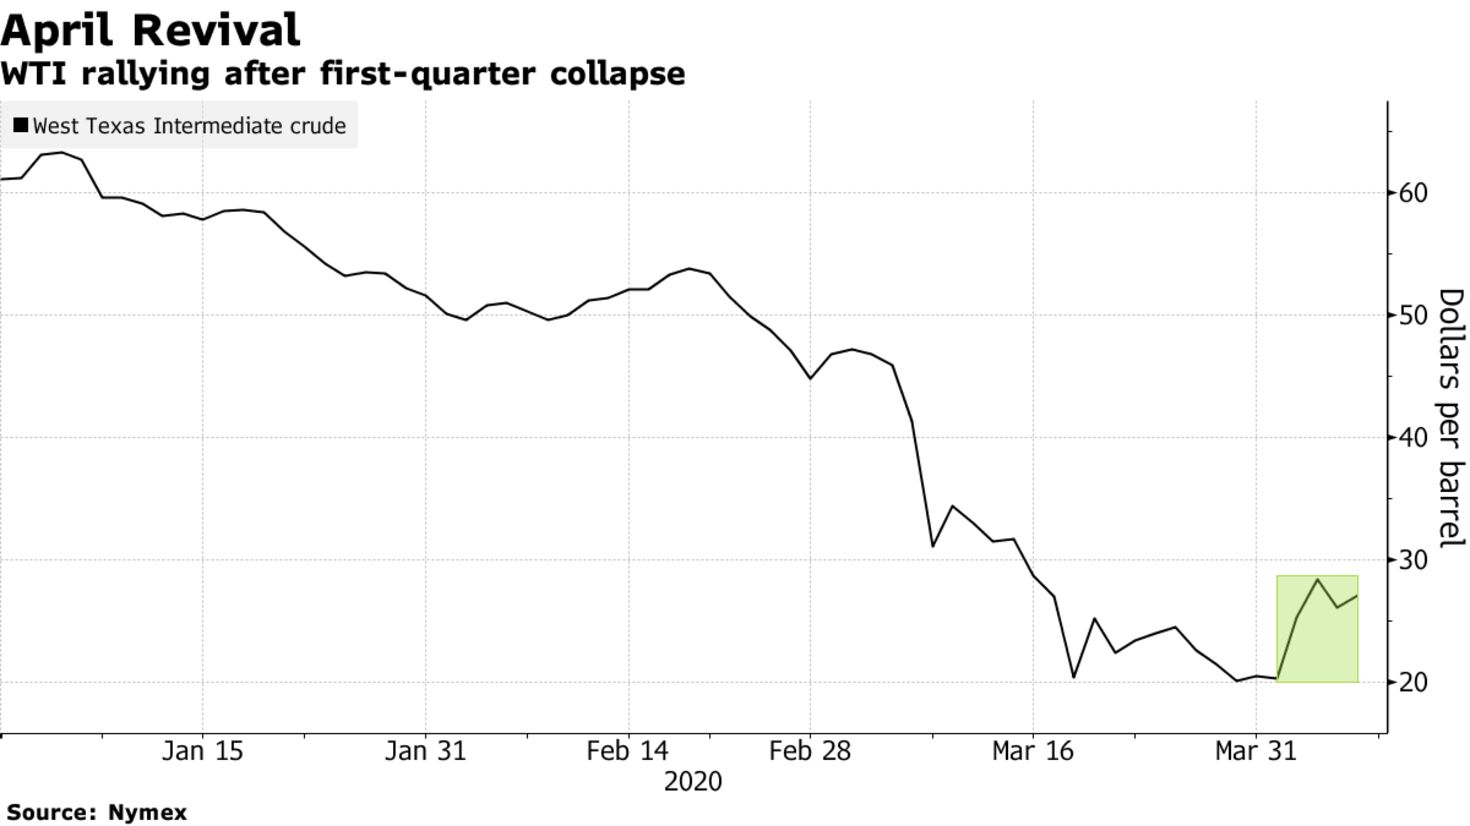 WTI rallying after first-quarter collapse